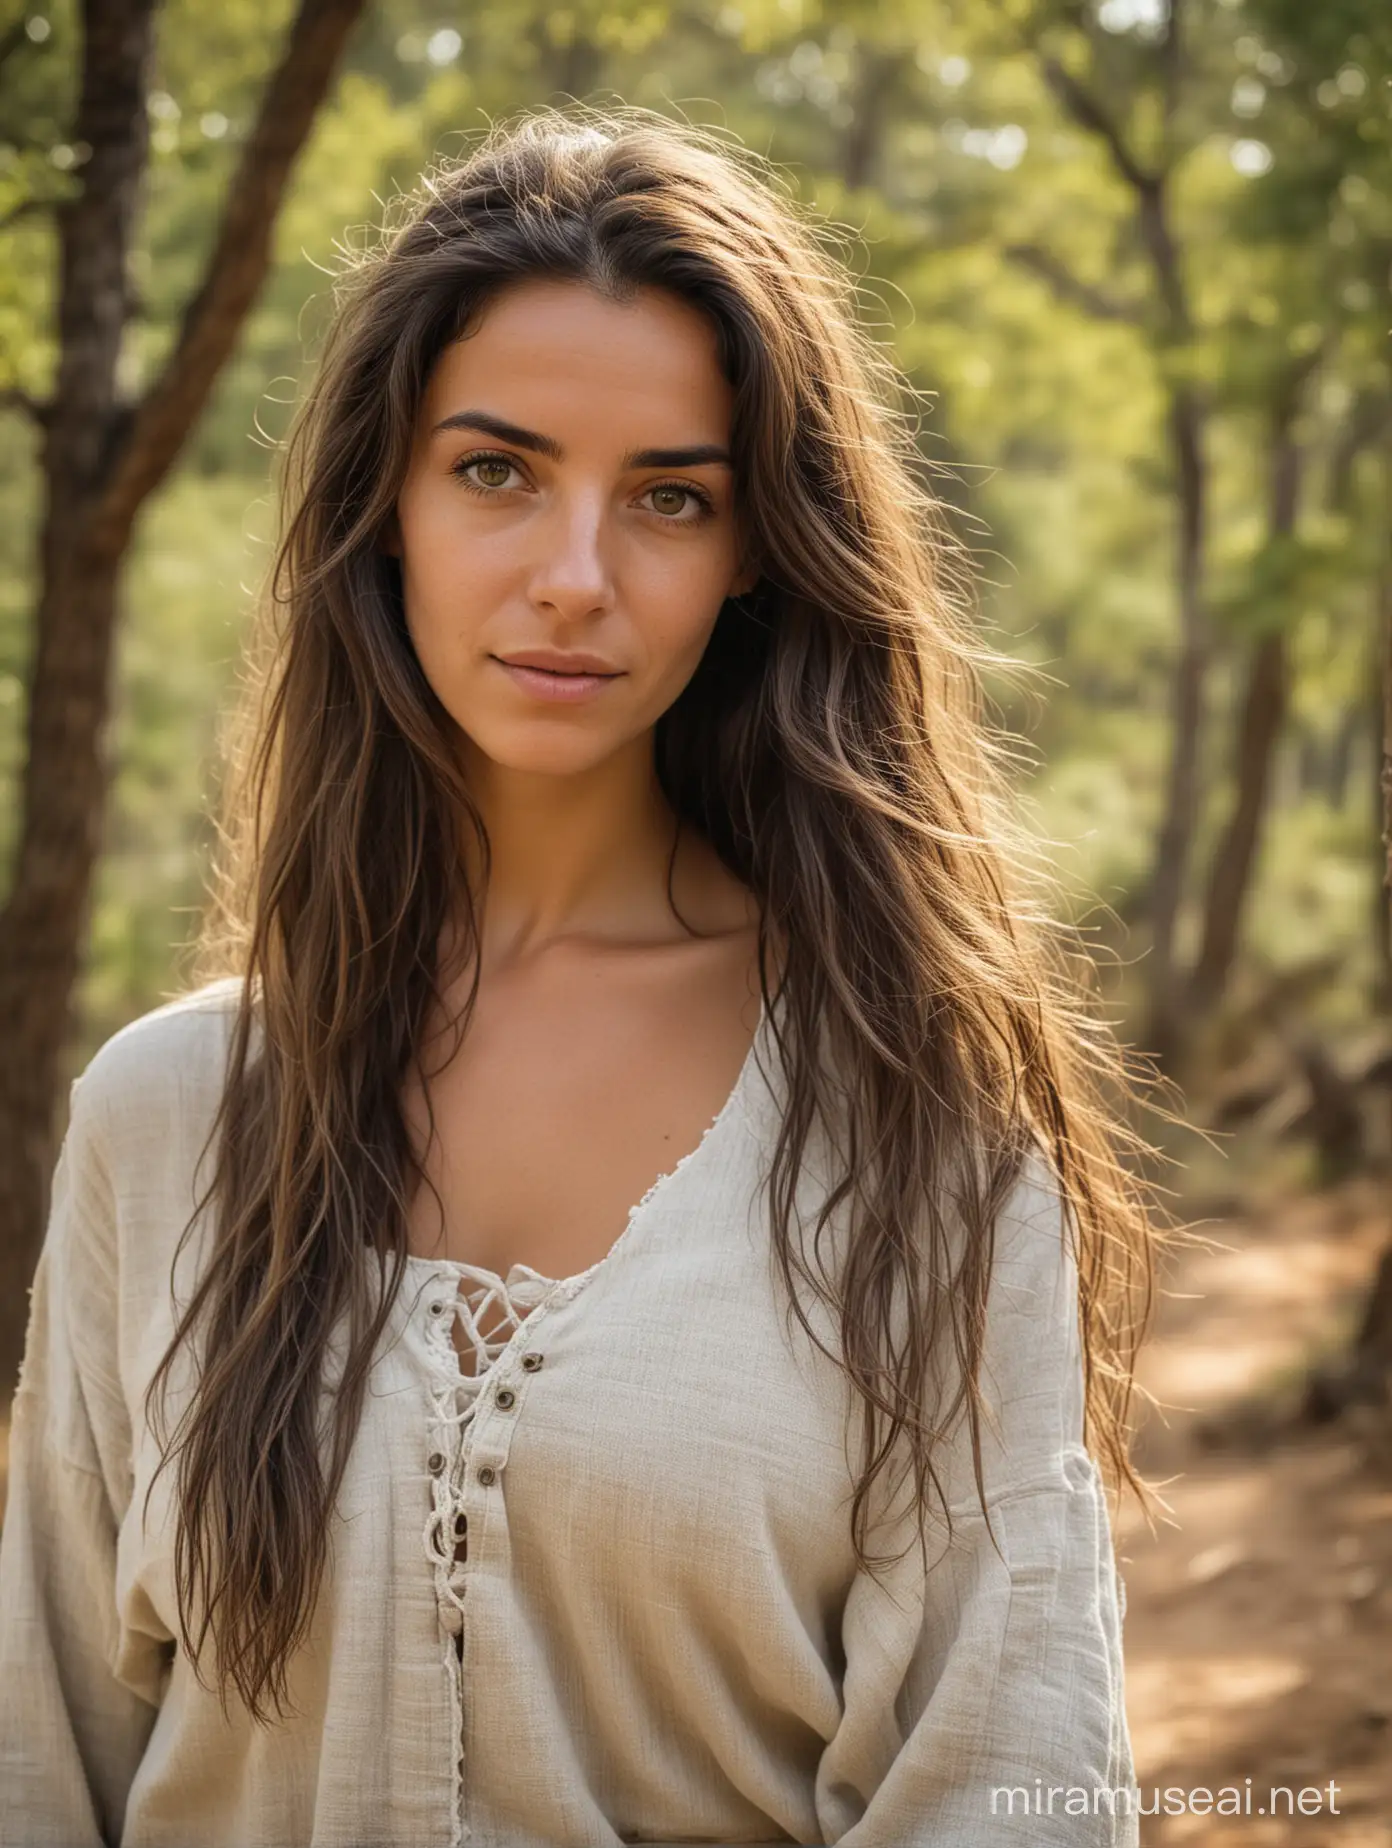 A Sardinian woman with long loose hair wearing roughly woven linen clothes, facial close up,  woodland background, looking into the camera. 